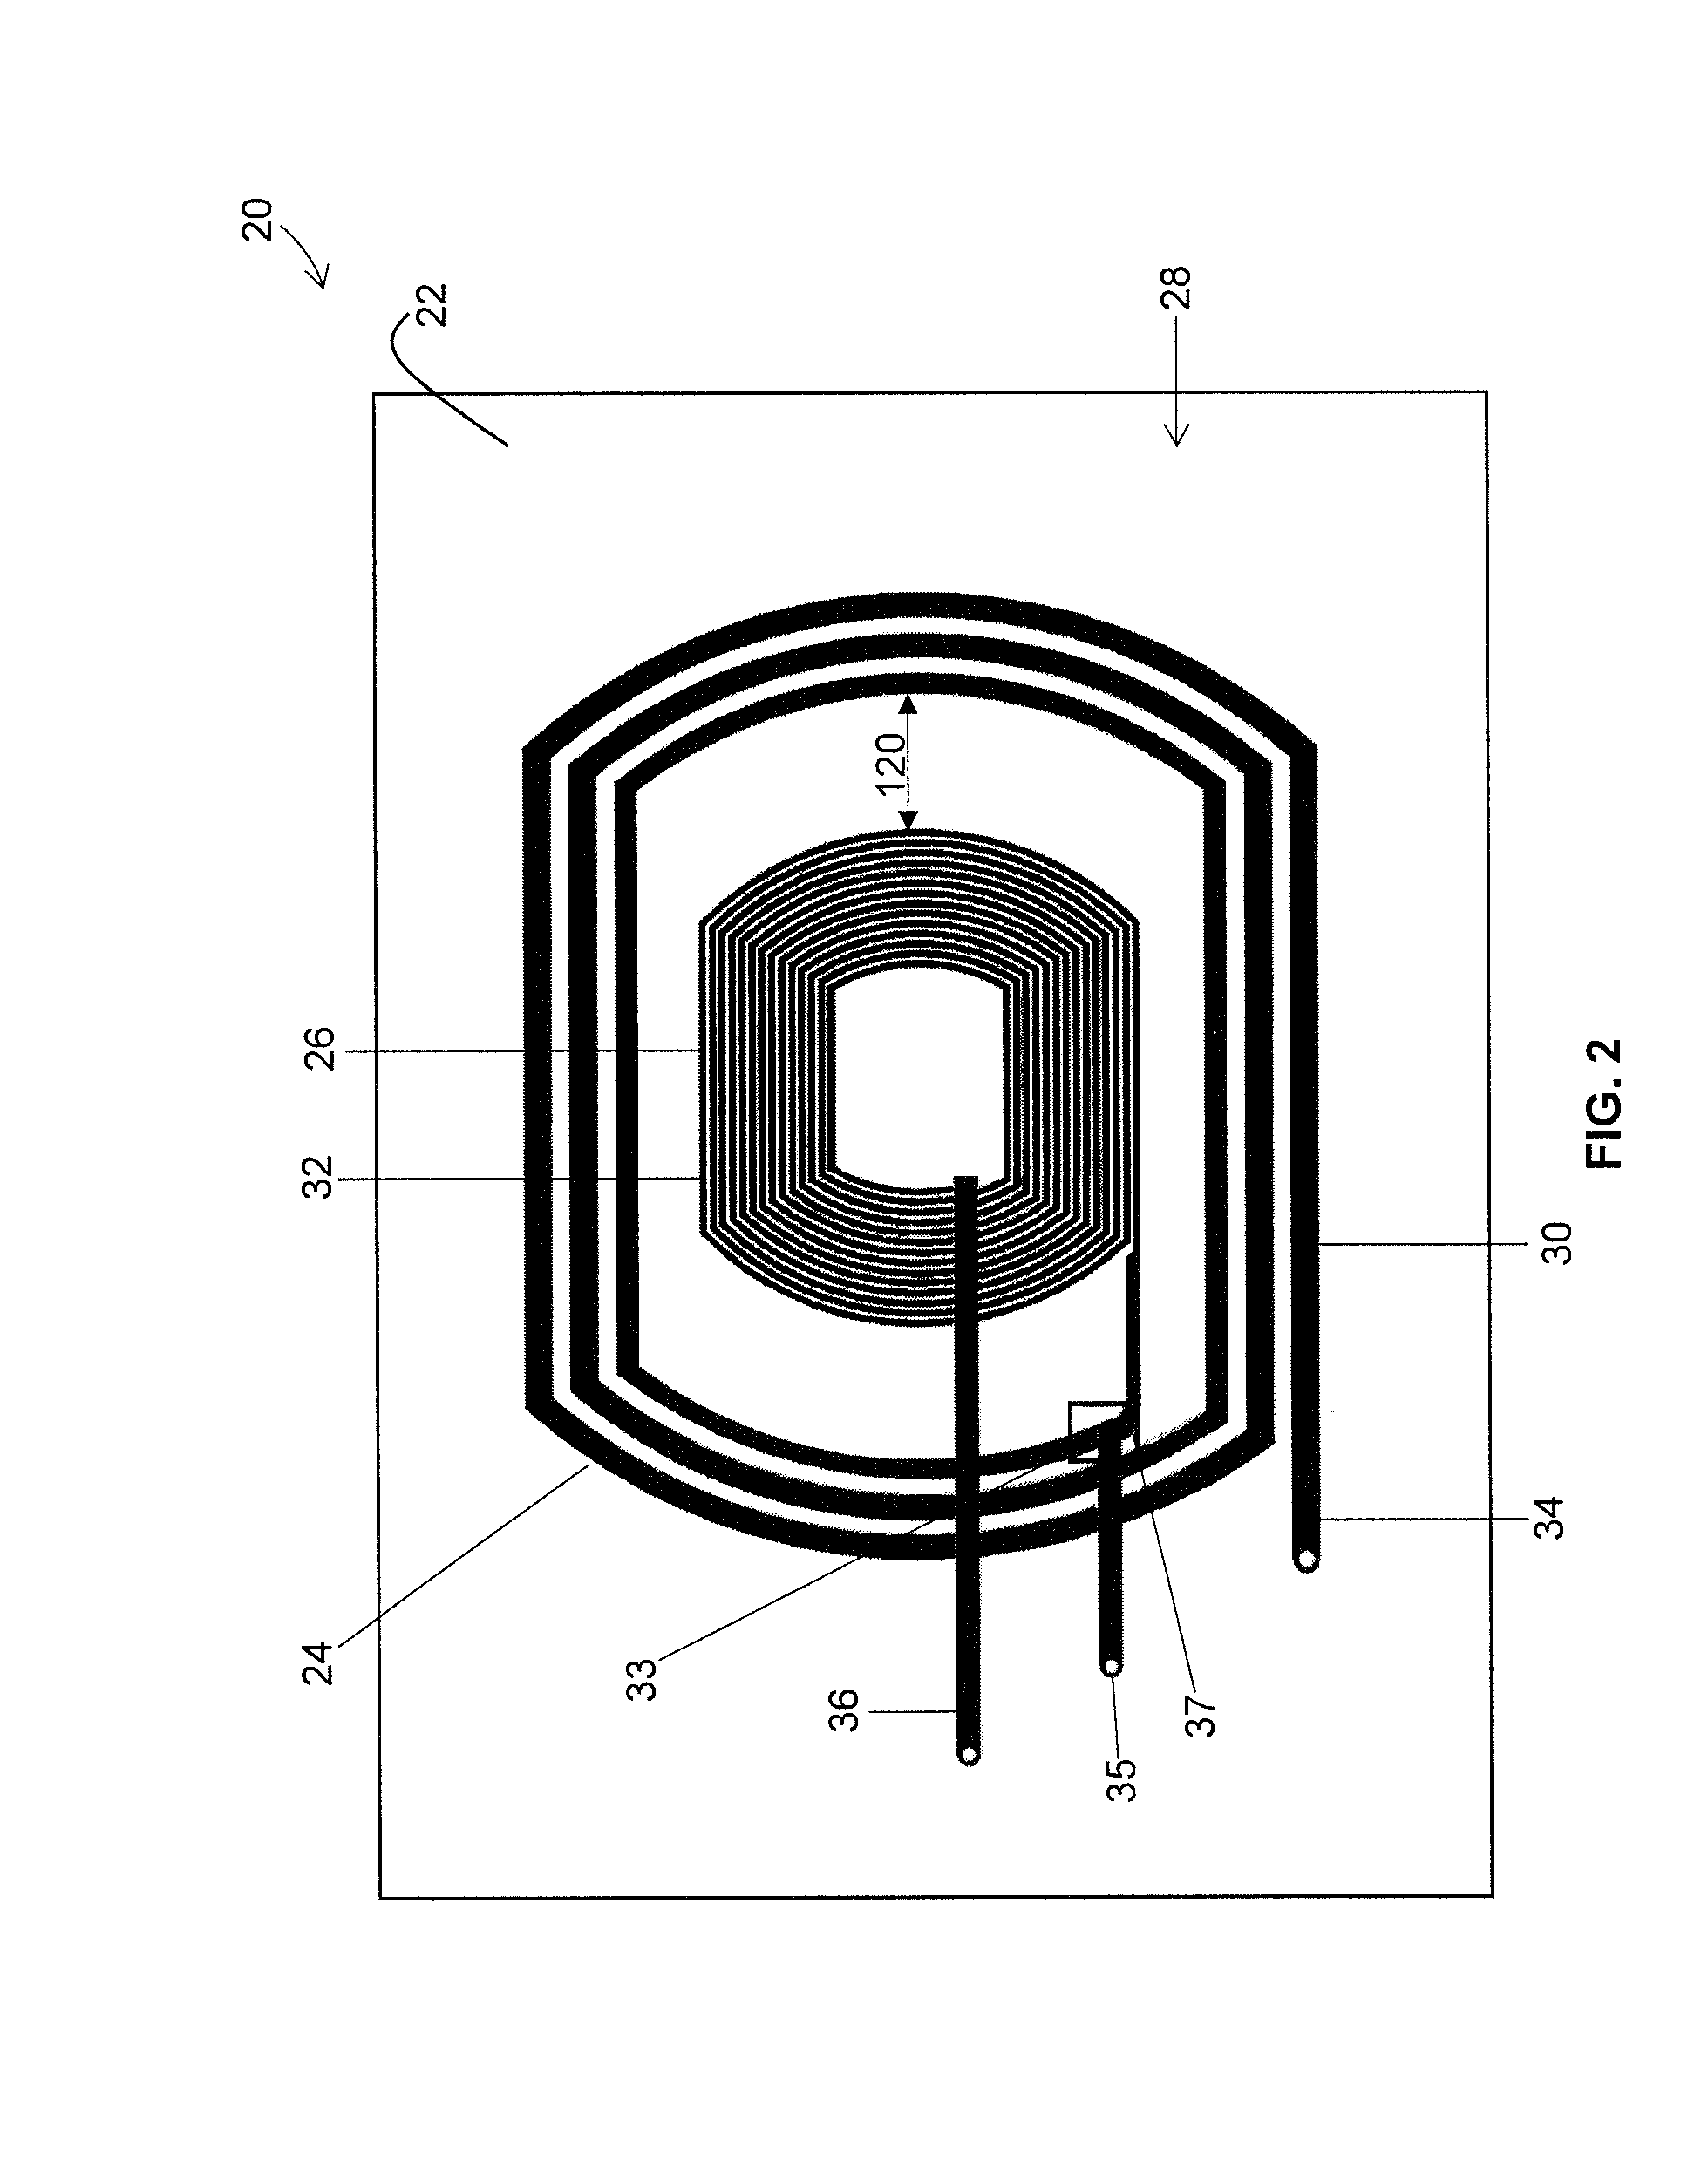 Electrical system incorporating a single structure multimode antenna for wireless power transmission using magnetic field coupling